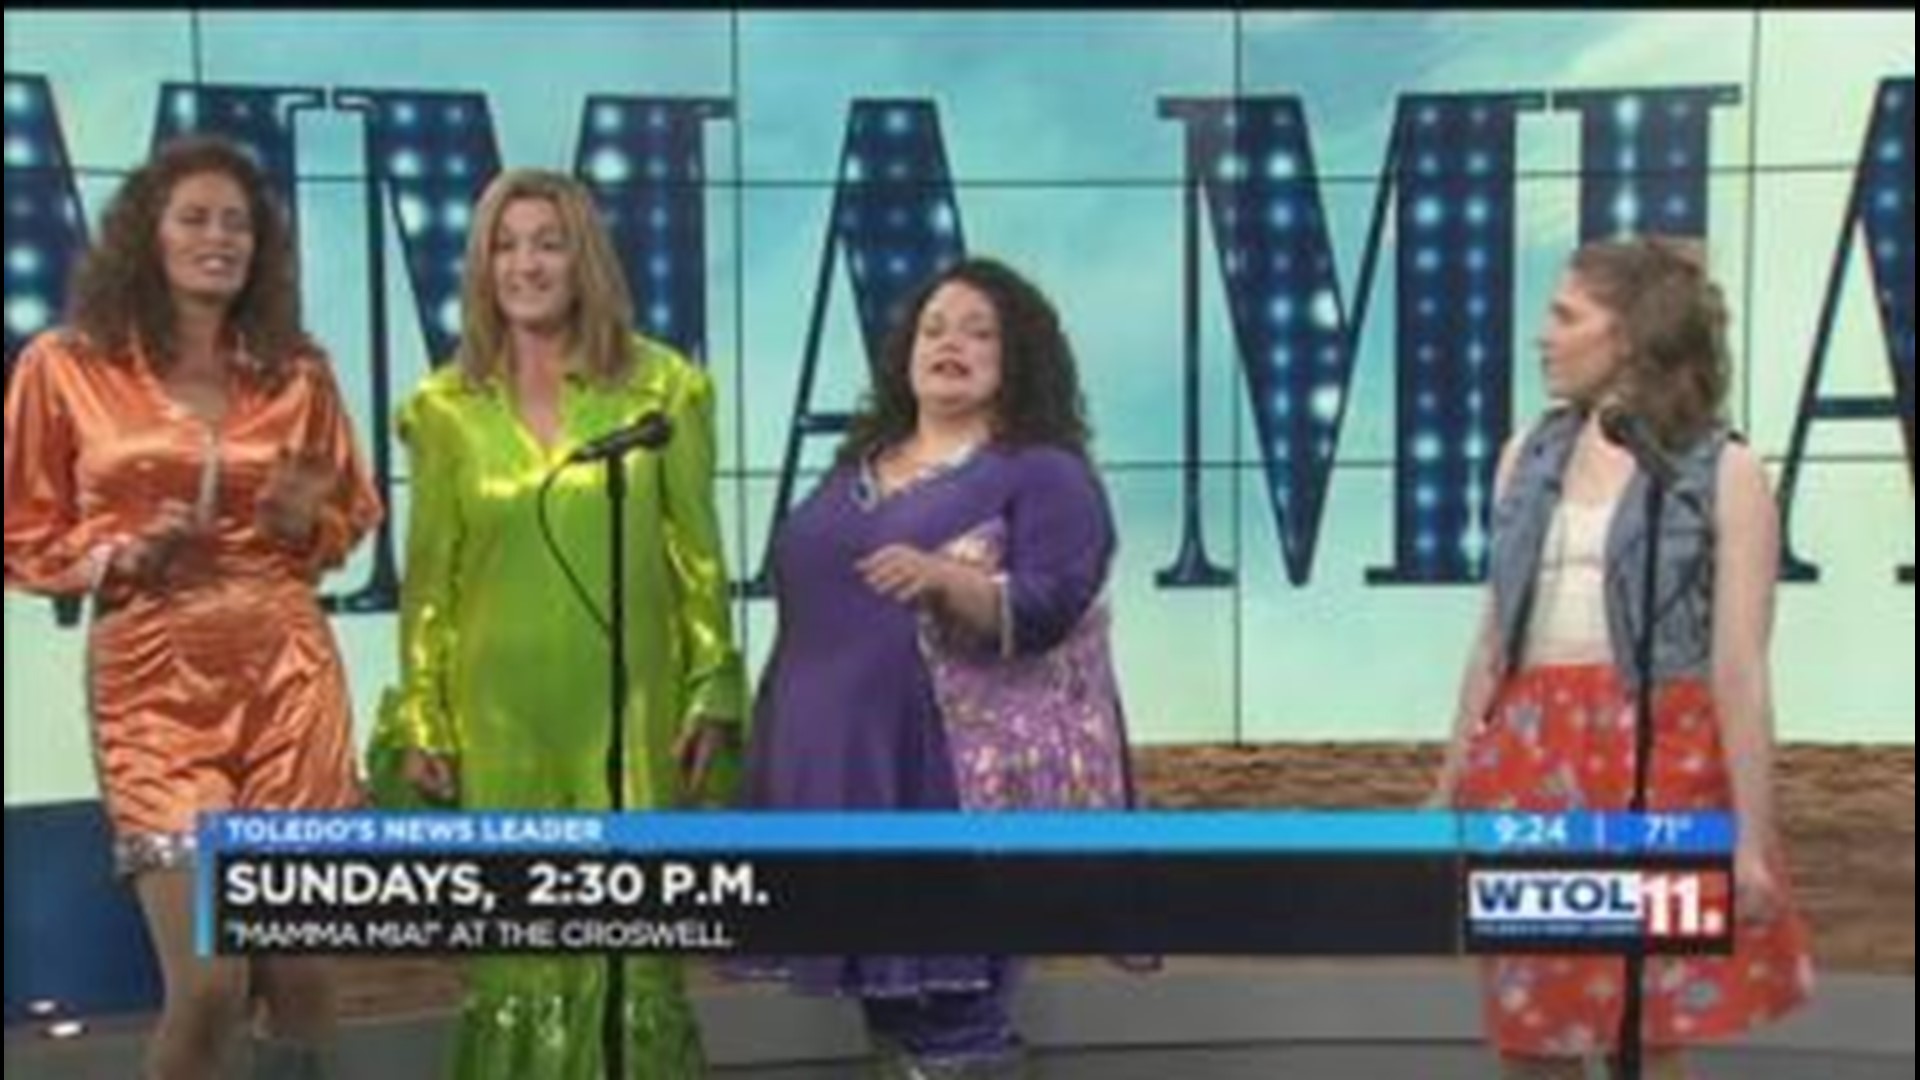 Check out Mamma Mia at the Croswell